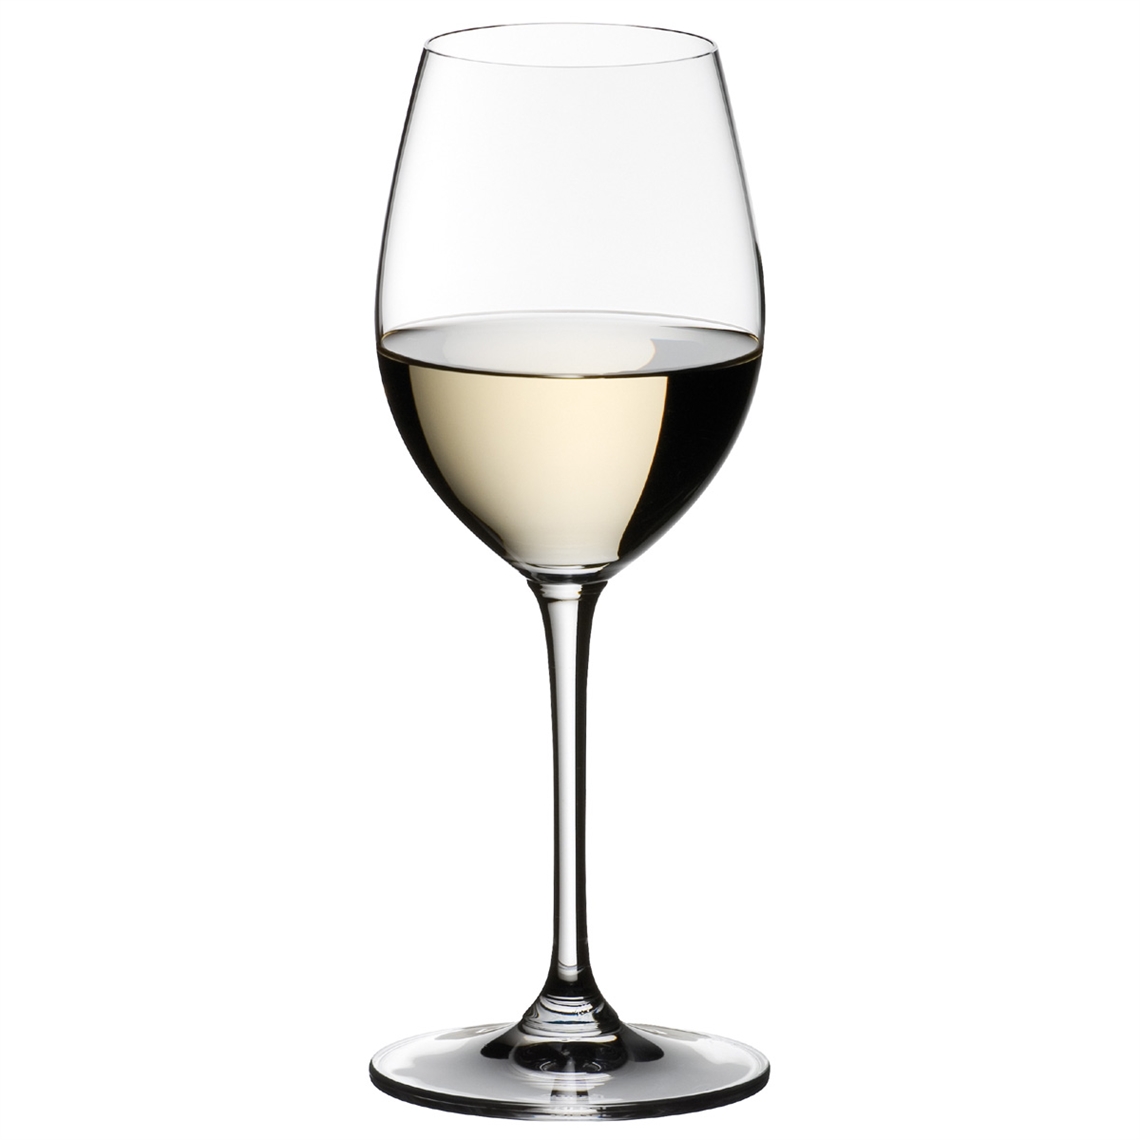 View more wine glasses by region and grape from our Dessert Wine Glasses range